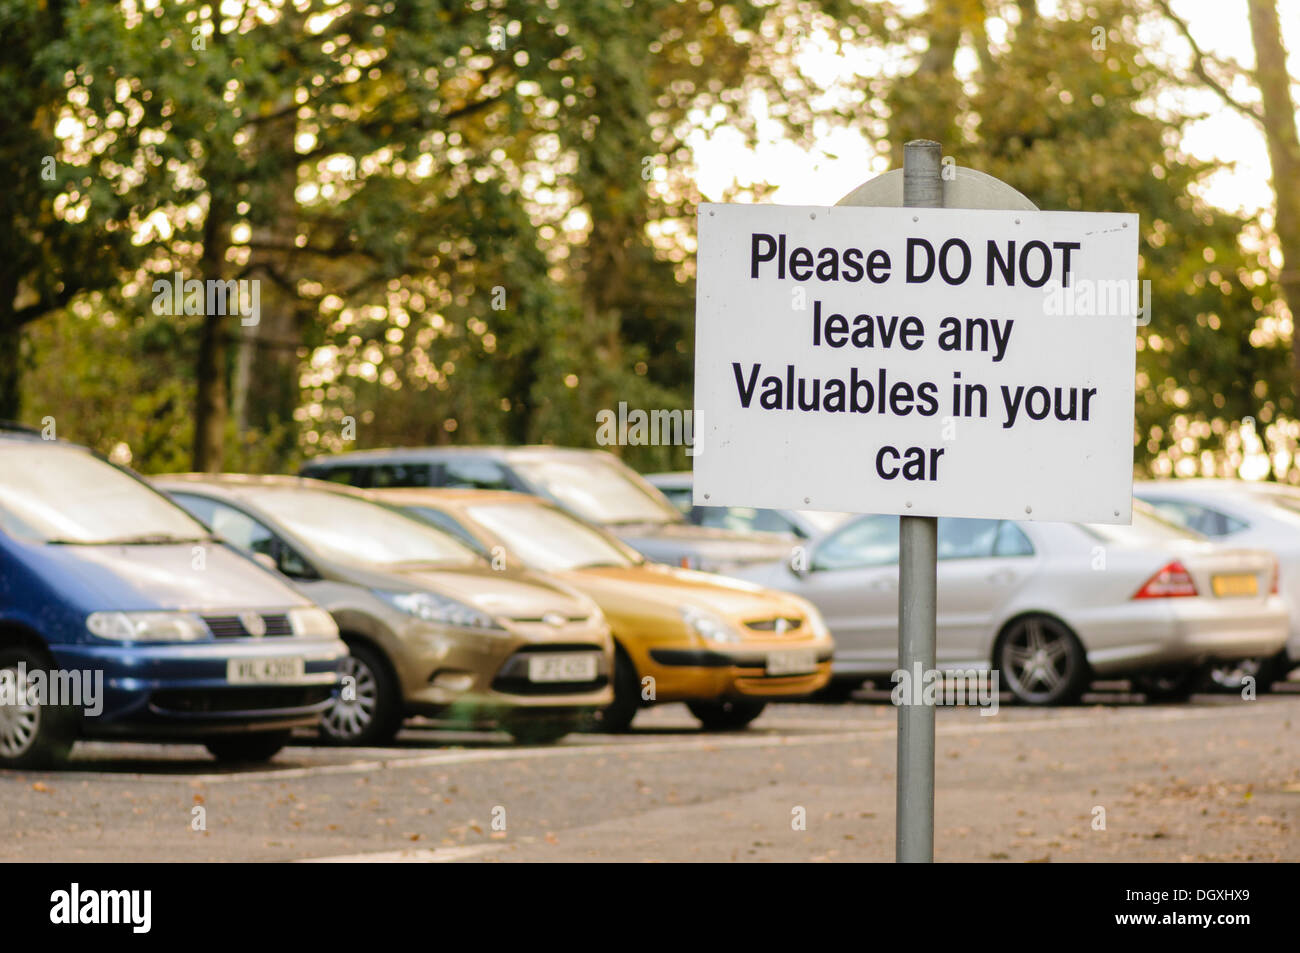 Sign in a car park warning drivers not to leave any valuables in their car Stock Photo